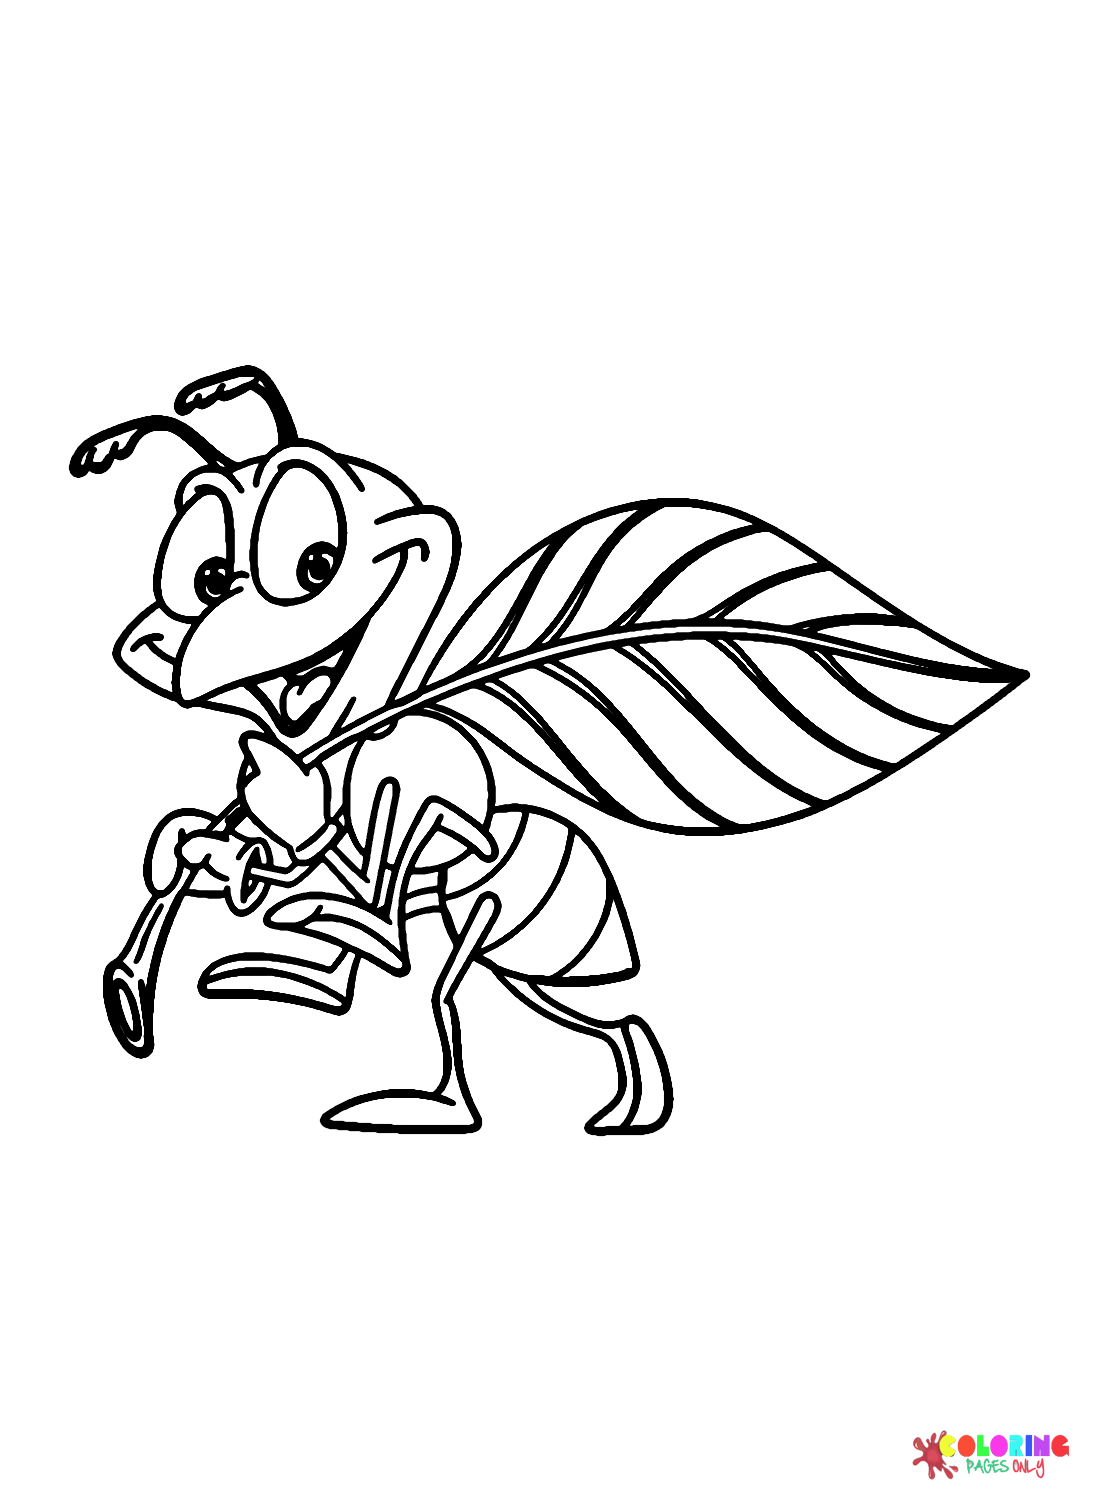 Cute Ant with Leaf Coloring Page